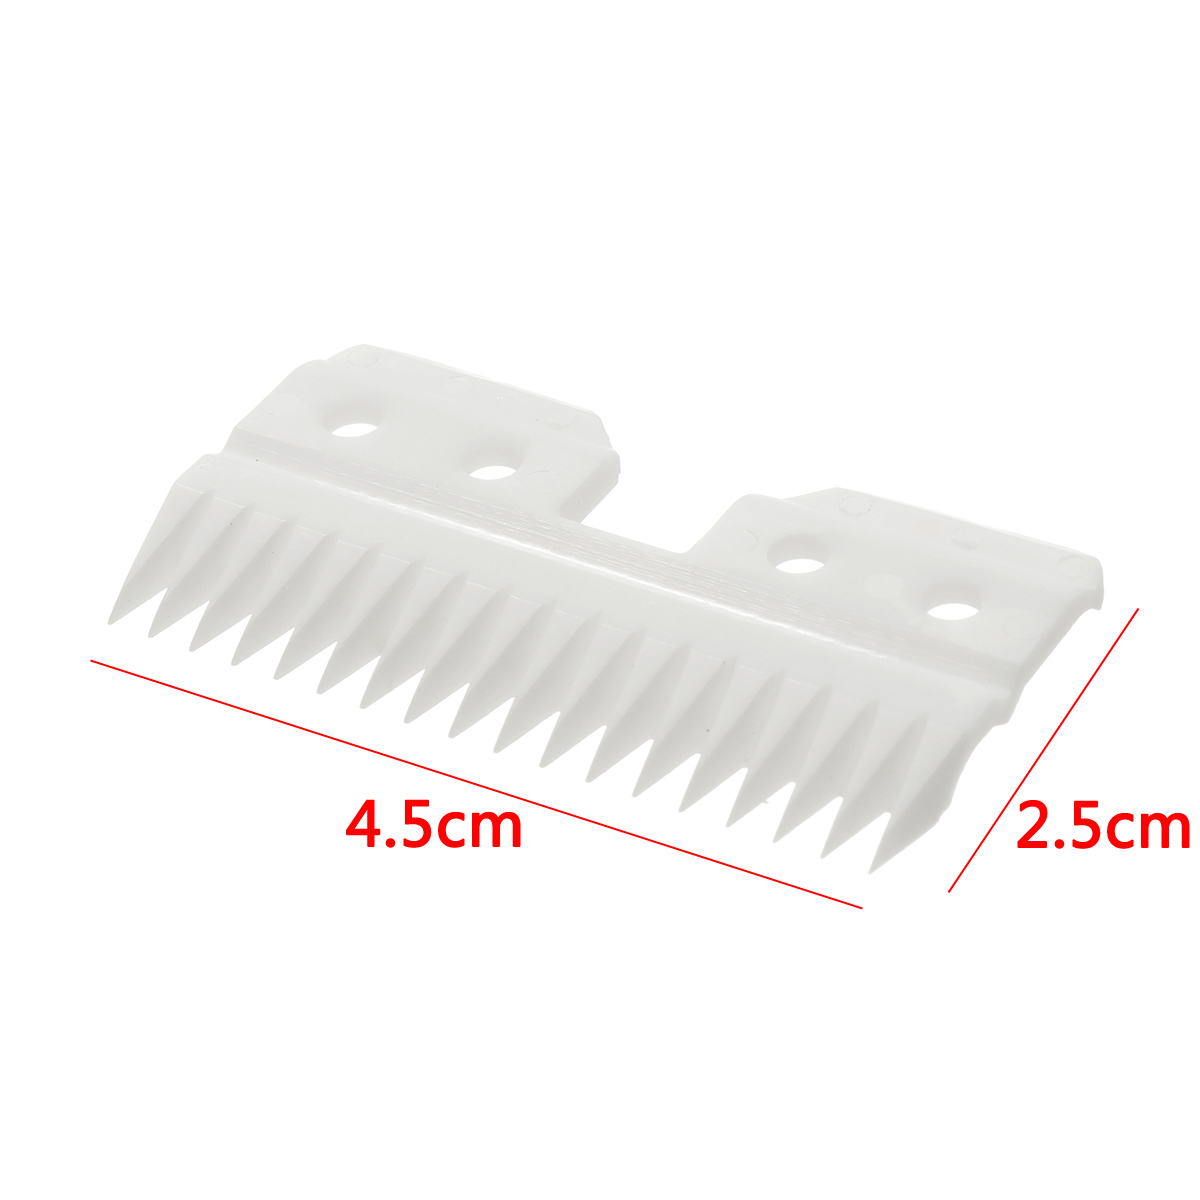 1x18-Teeth-Ceramic-Blade-Replacement-Accessories-For-OSTER-A5-Series-Clipper-Blades-Cutter-1561061-2